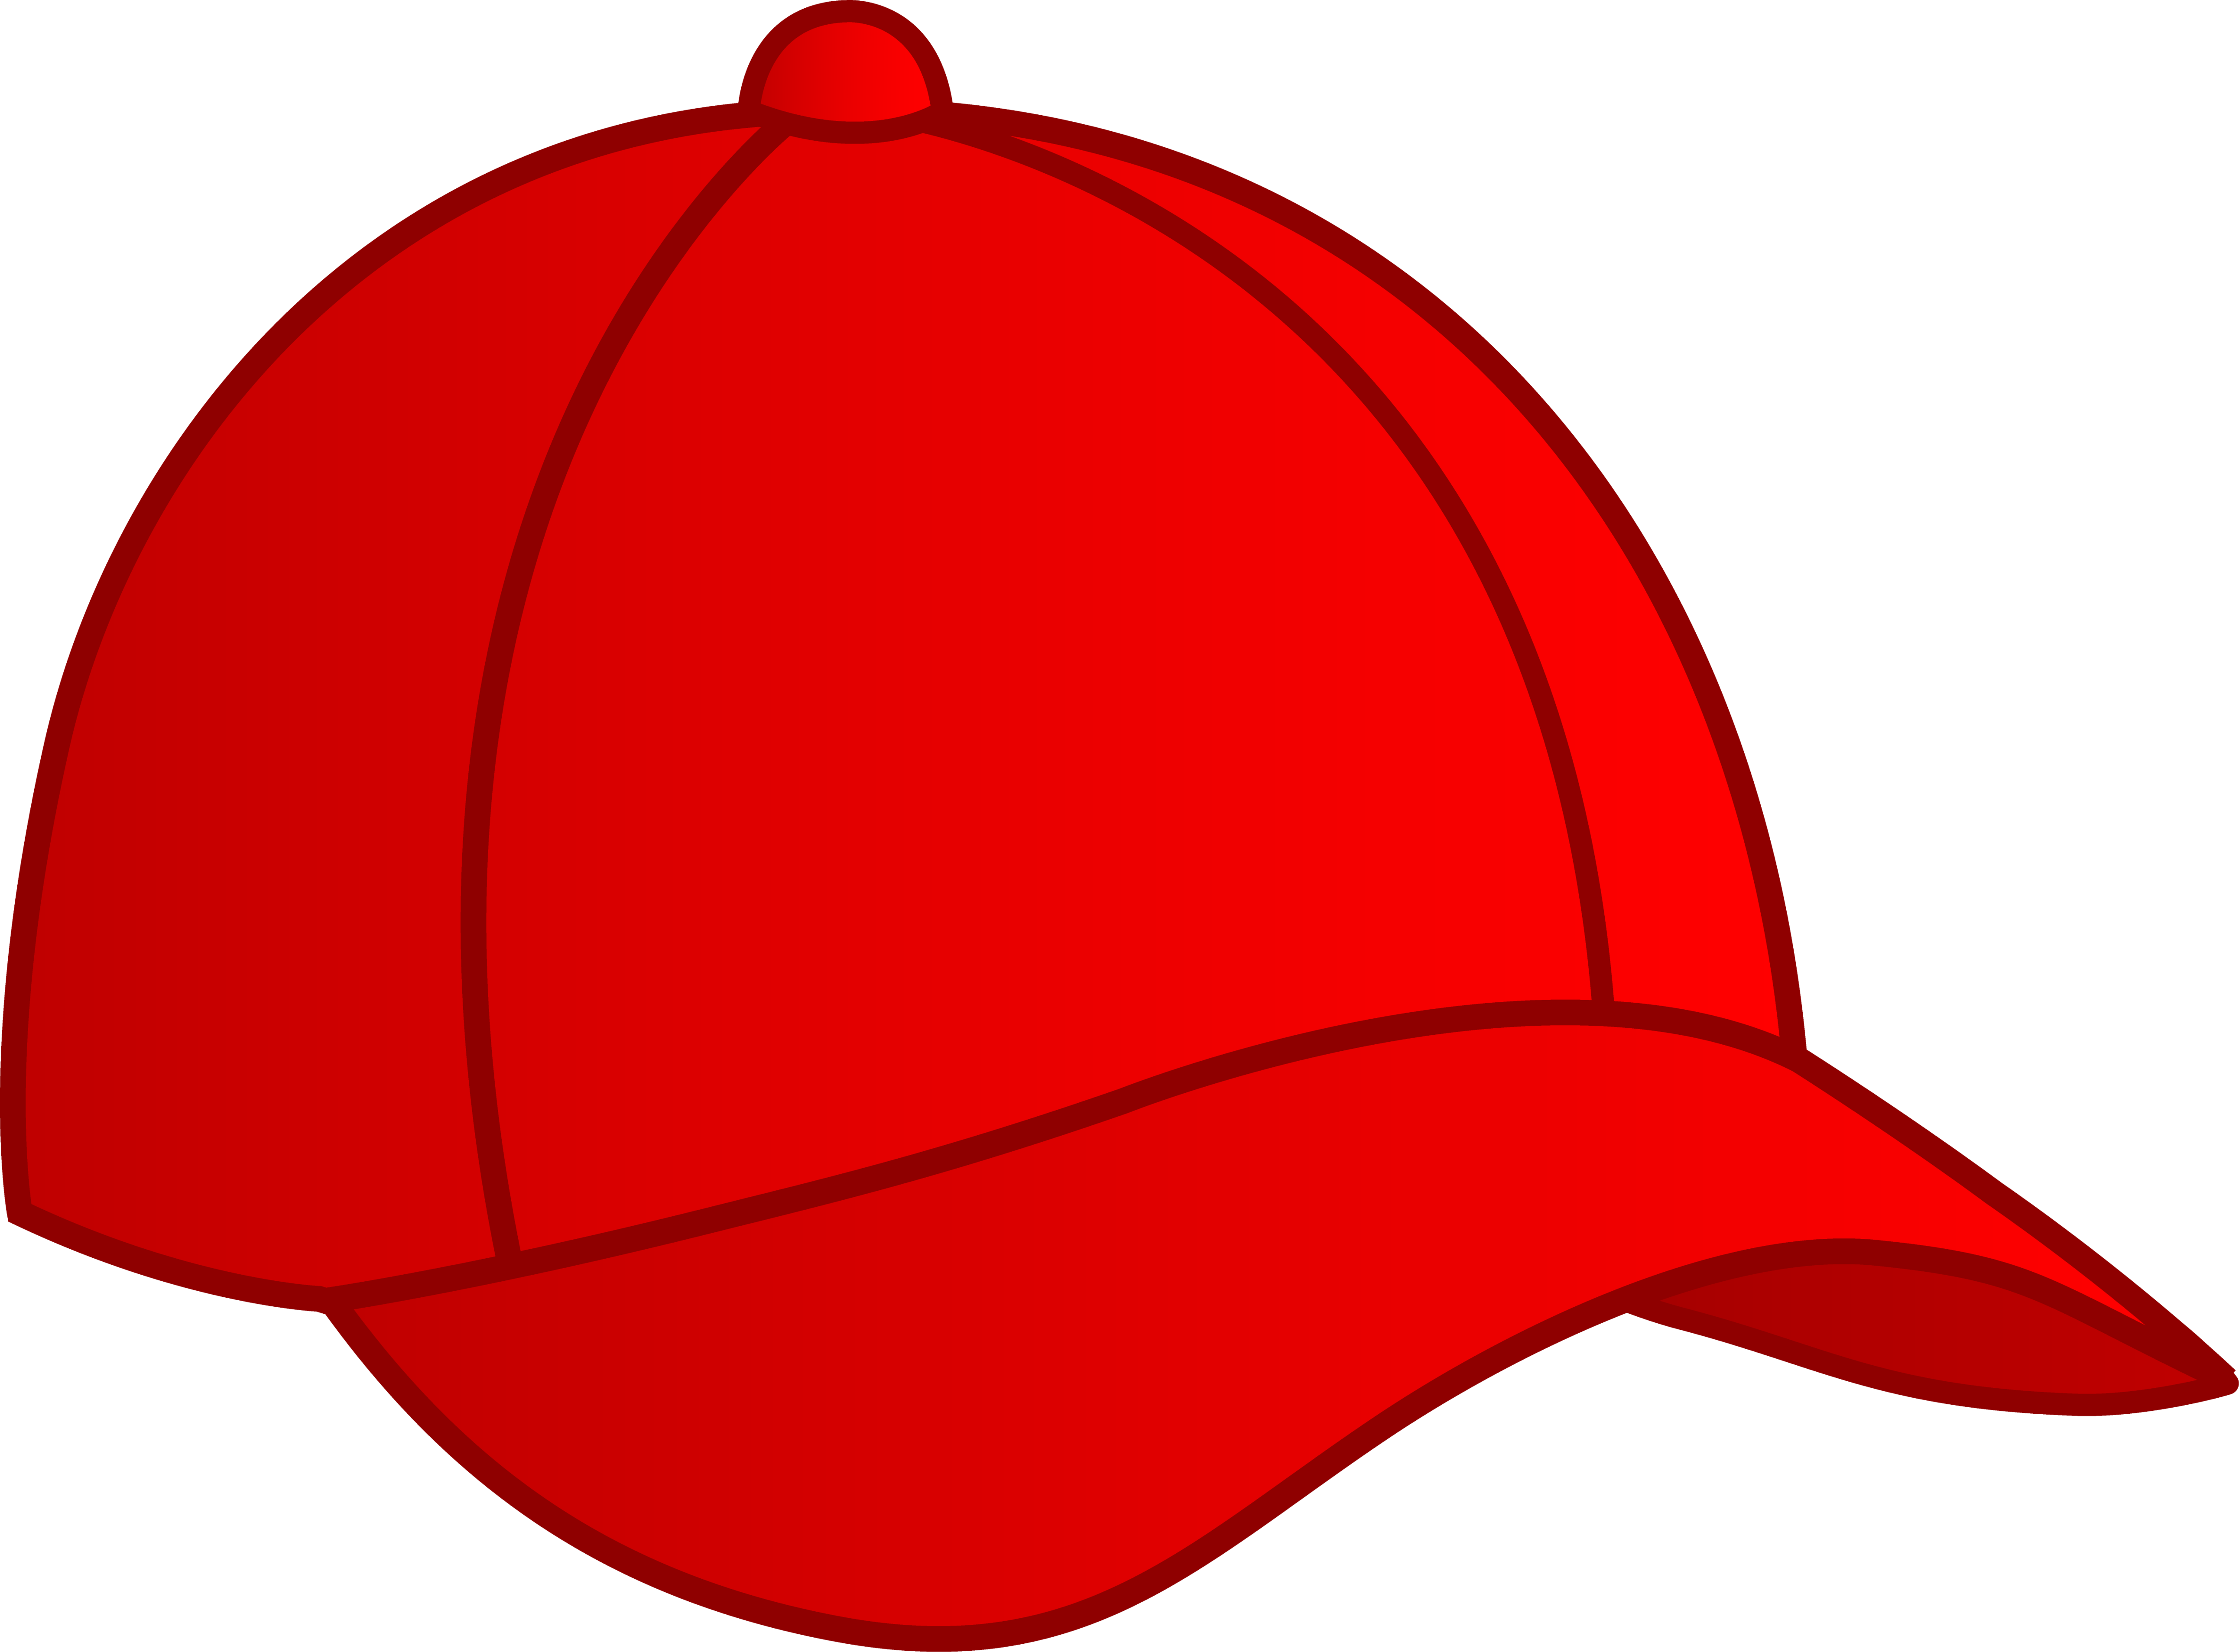 Pics For > Chinese Hat Cartoon Clipart - Free to use Clip Art Resource